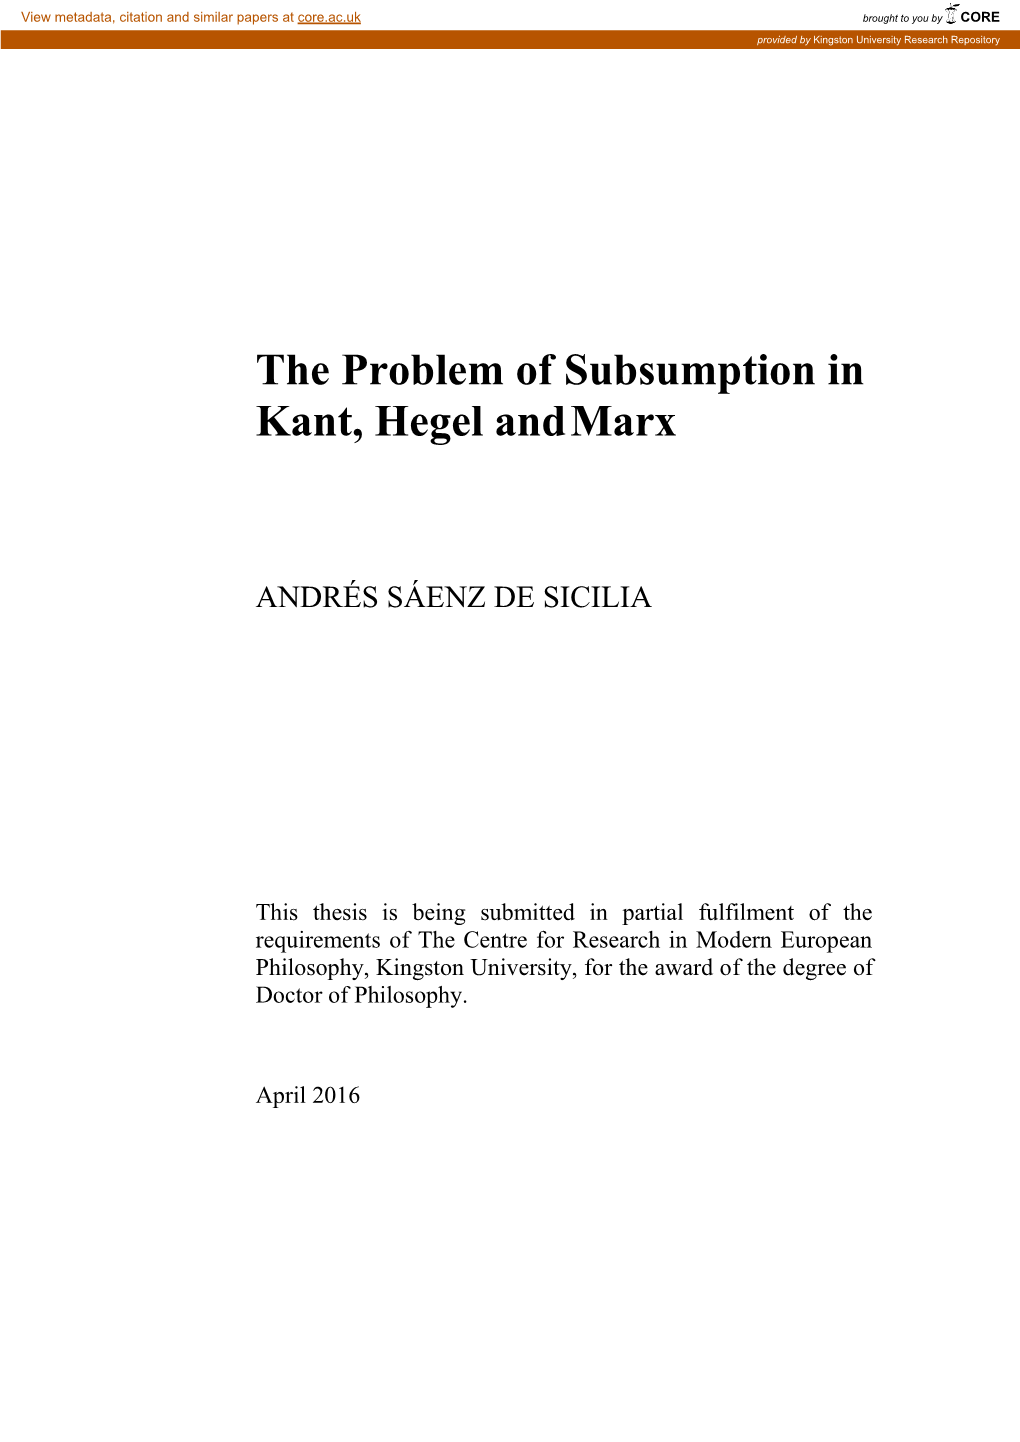 The Problem of Subsumption in Kant, Hegel Andmarx